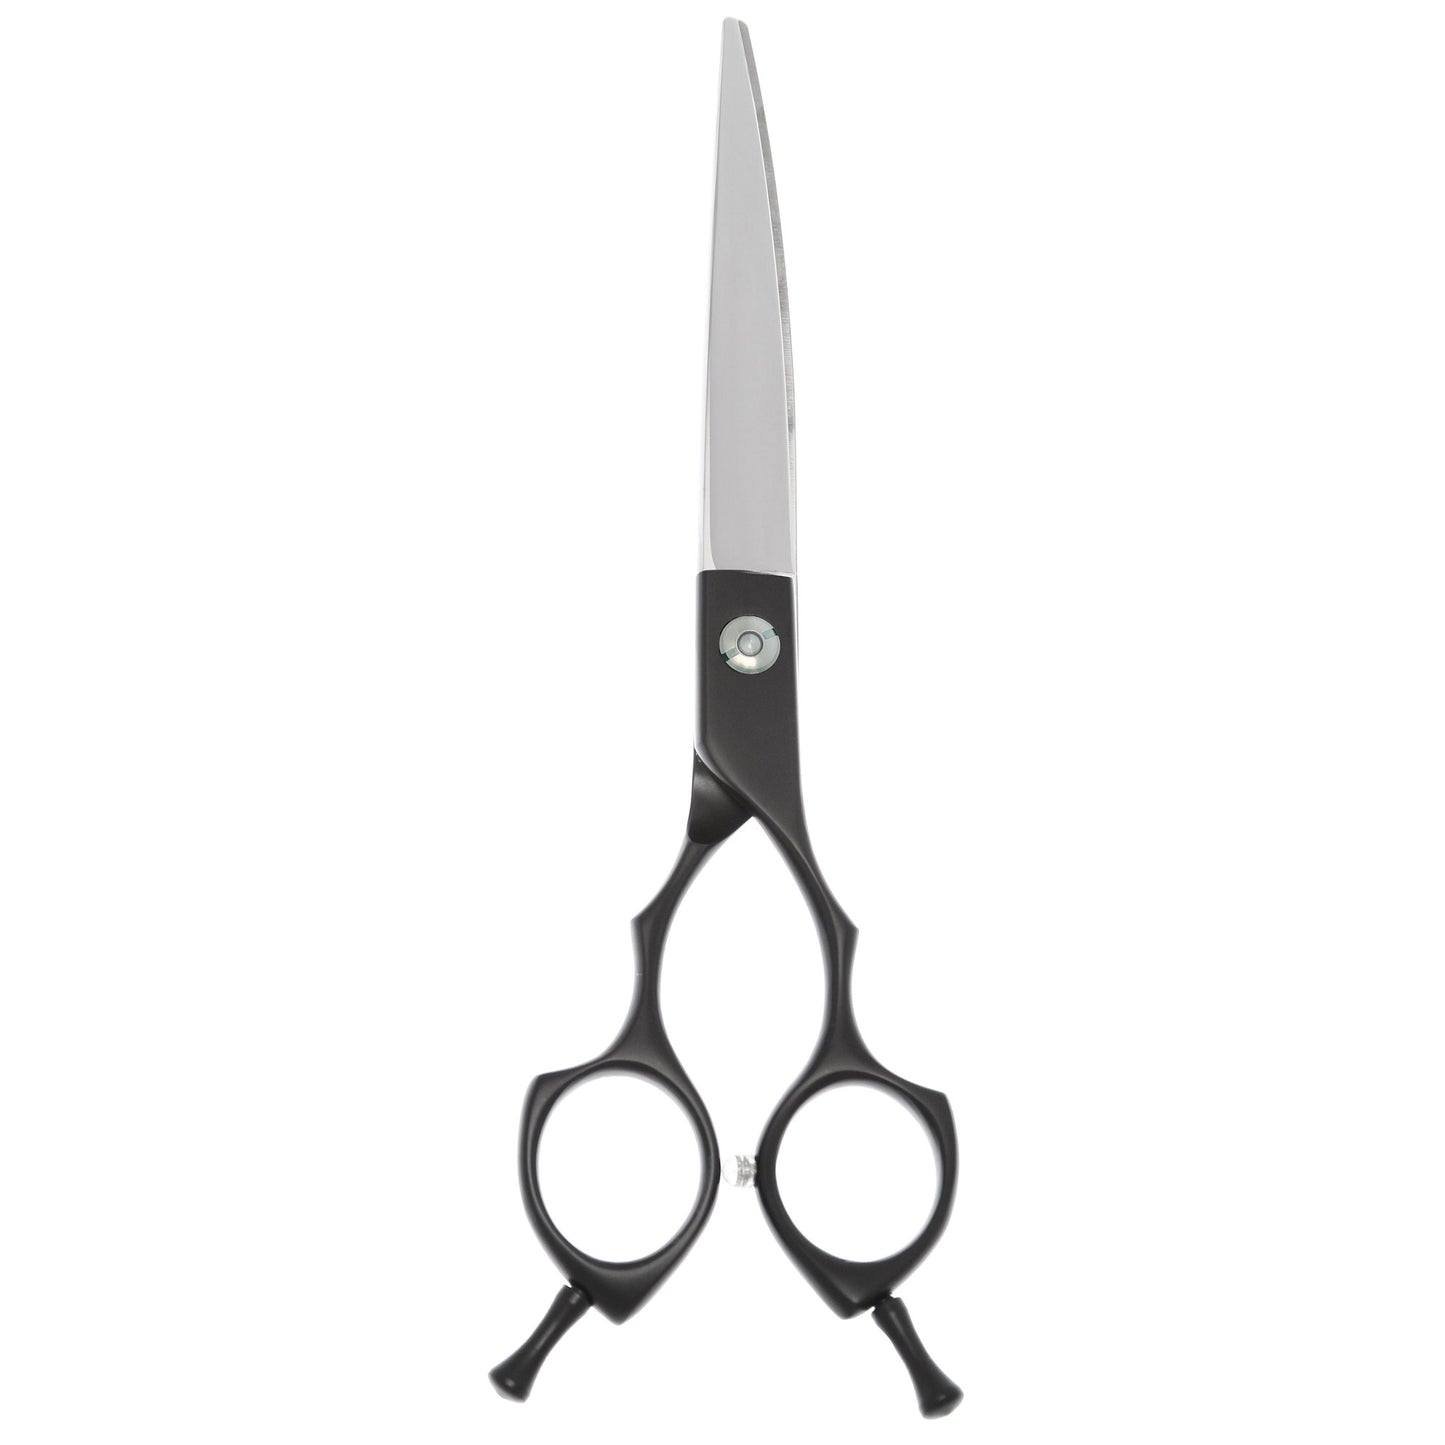 6.5" Black Curved Asian Fusion Grooming Shears